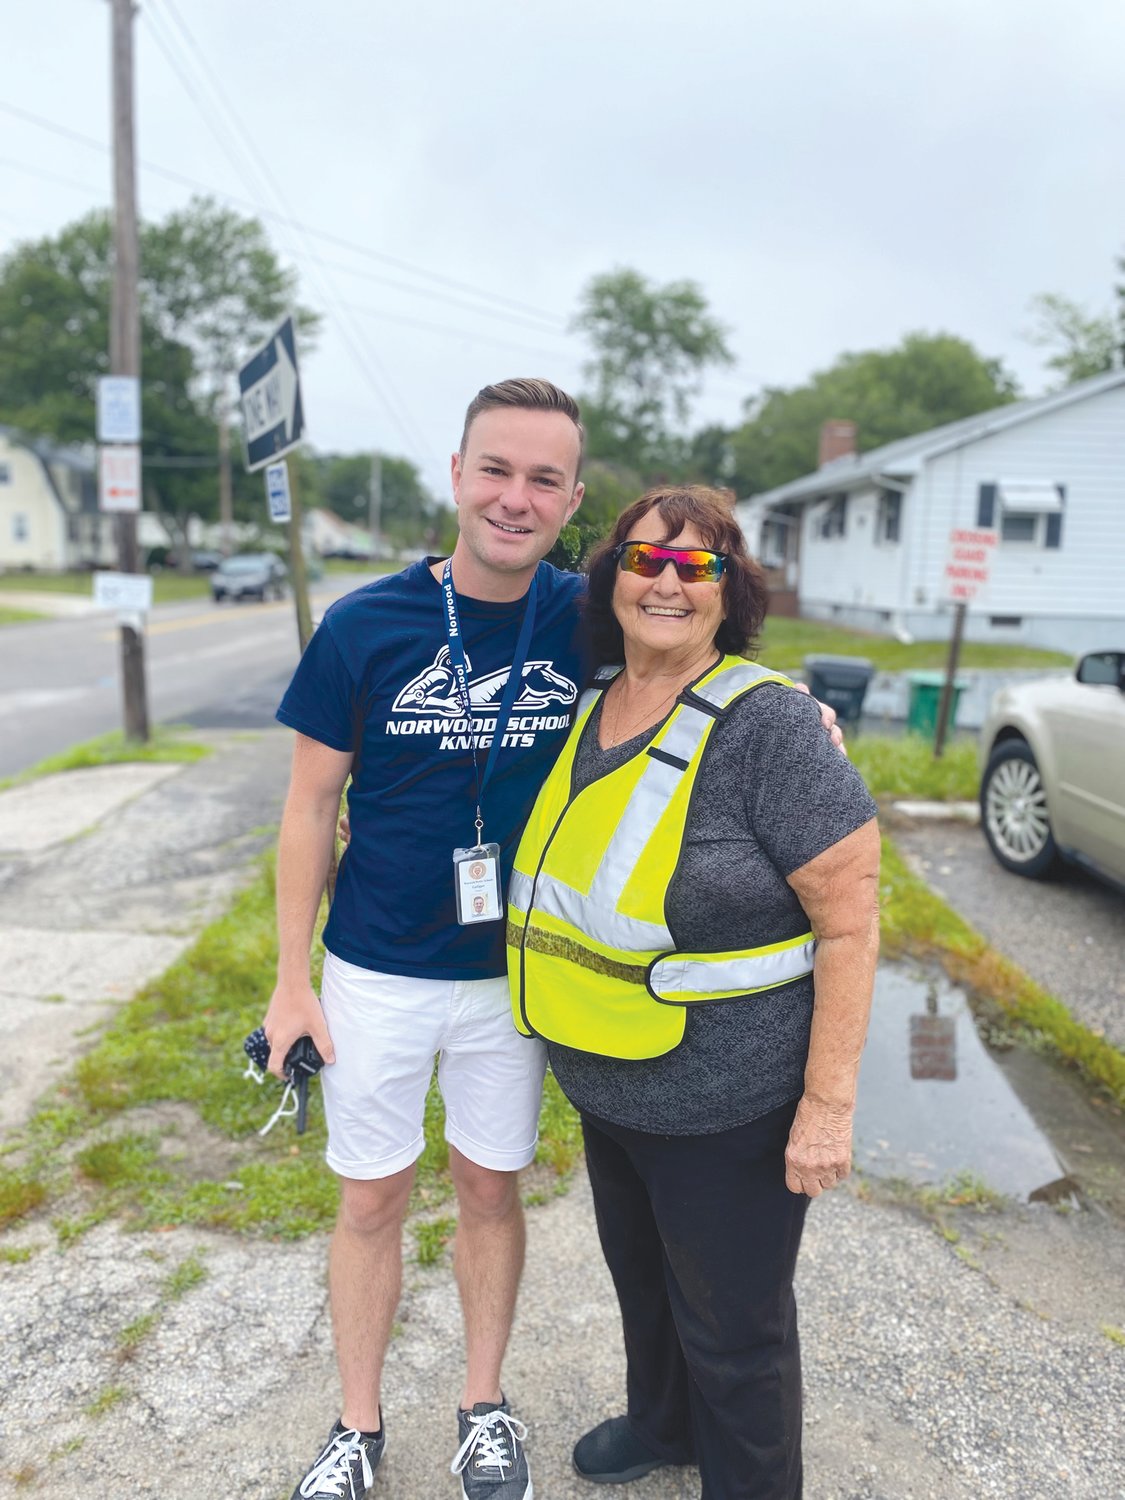 NOMINEE:
Warwick Elementary
School Principal
Frank
Galligan is a
nominee for
the Rhode
Island Outstanding
Beginning
Principal
of the
Year award.
He is pictured
here
with crossing
guard
Gerry Davis
while serving
as interim
principal at
Norwood
School.
(Submitted
photo)